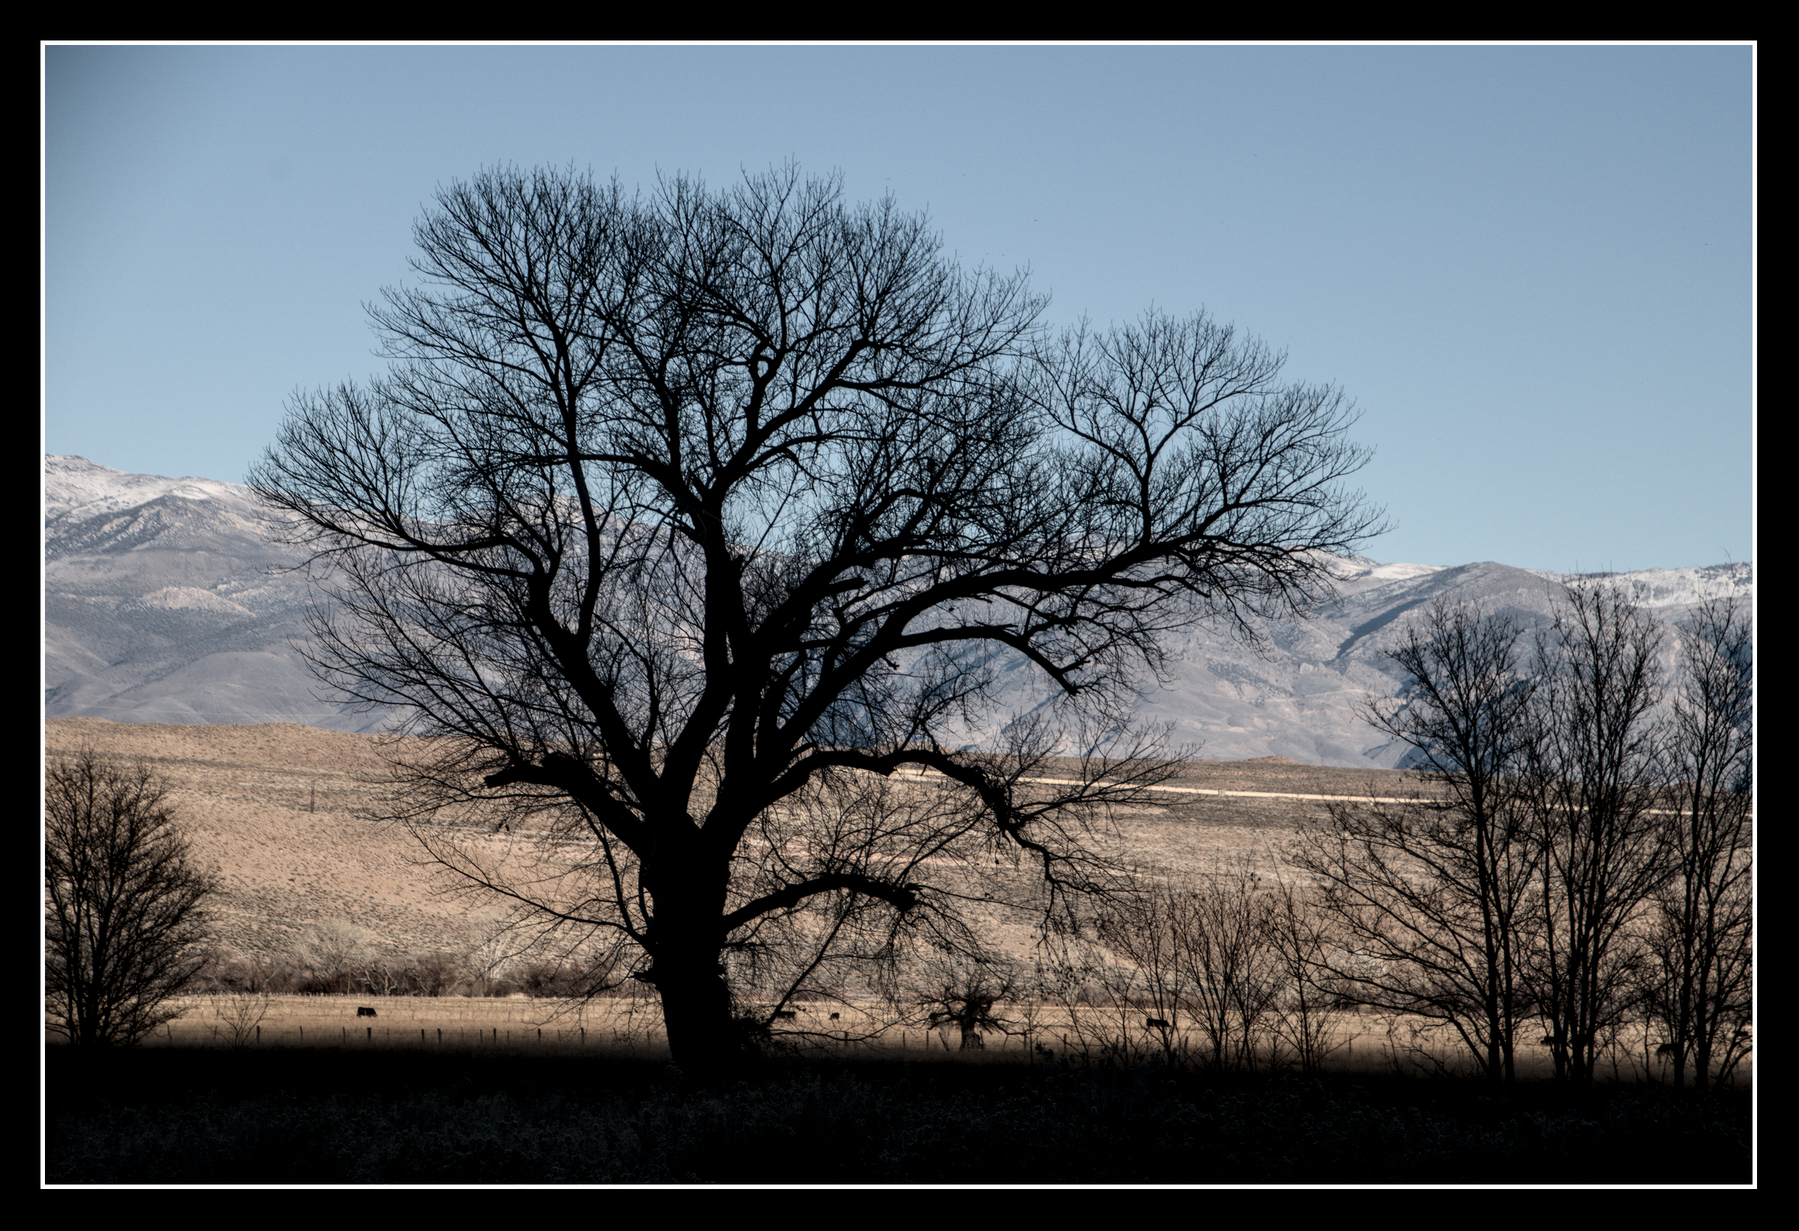 A large cottonwood tree with no leaves stands in shadow, silhouetted against a bright, high desert landscape.